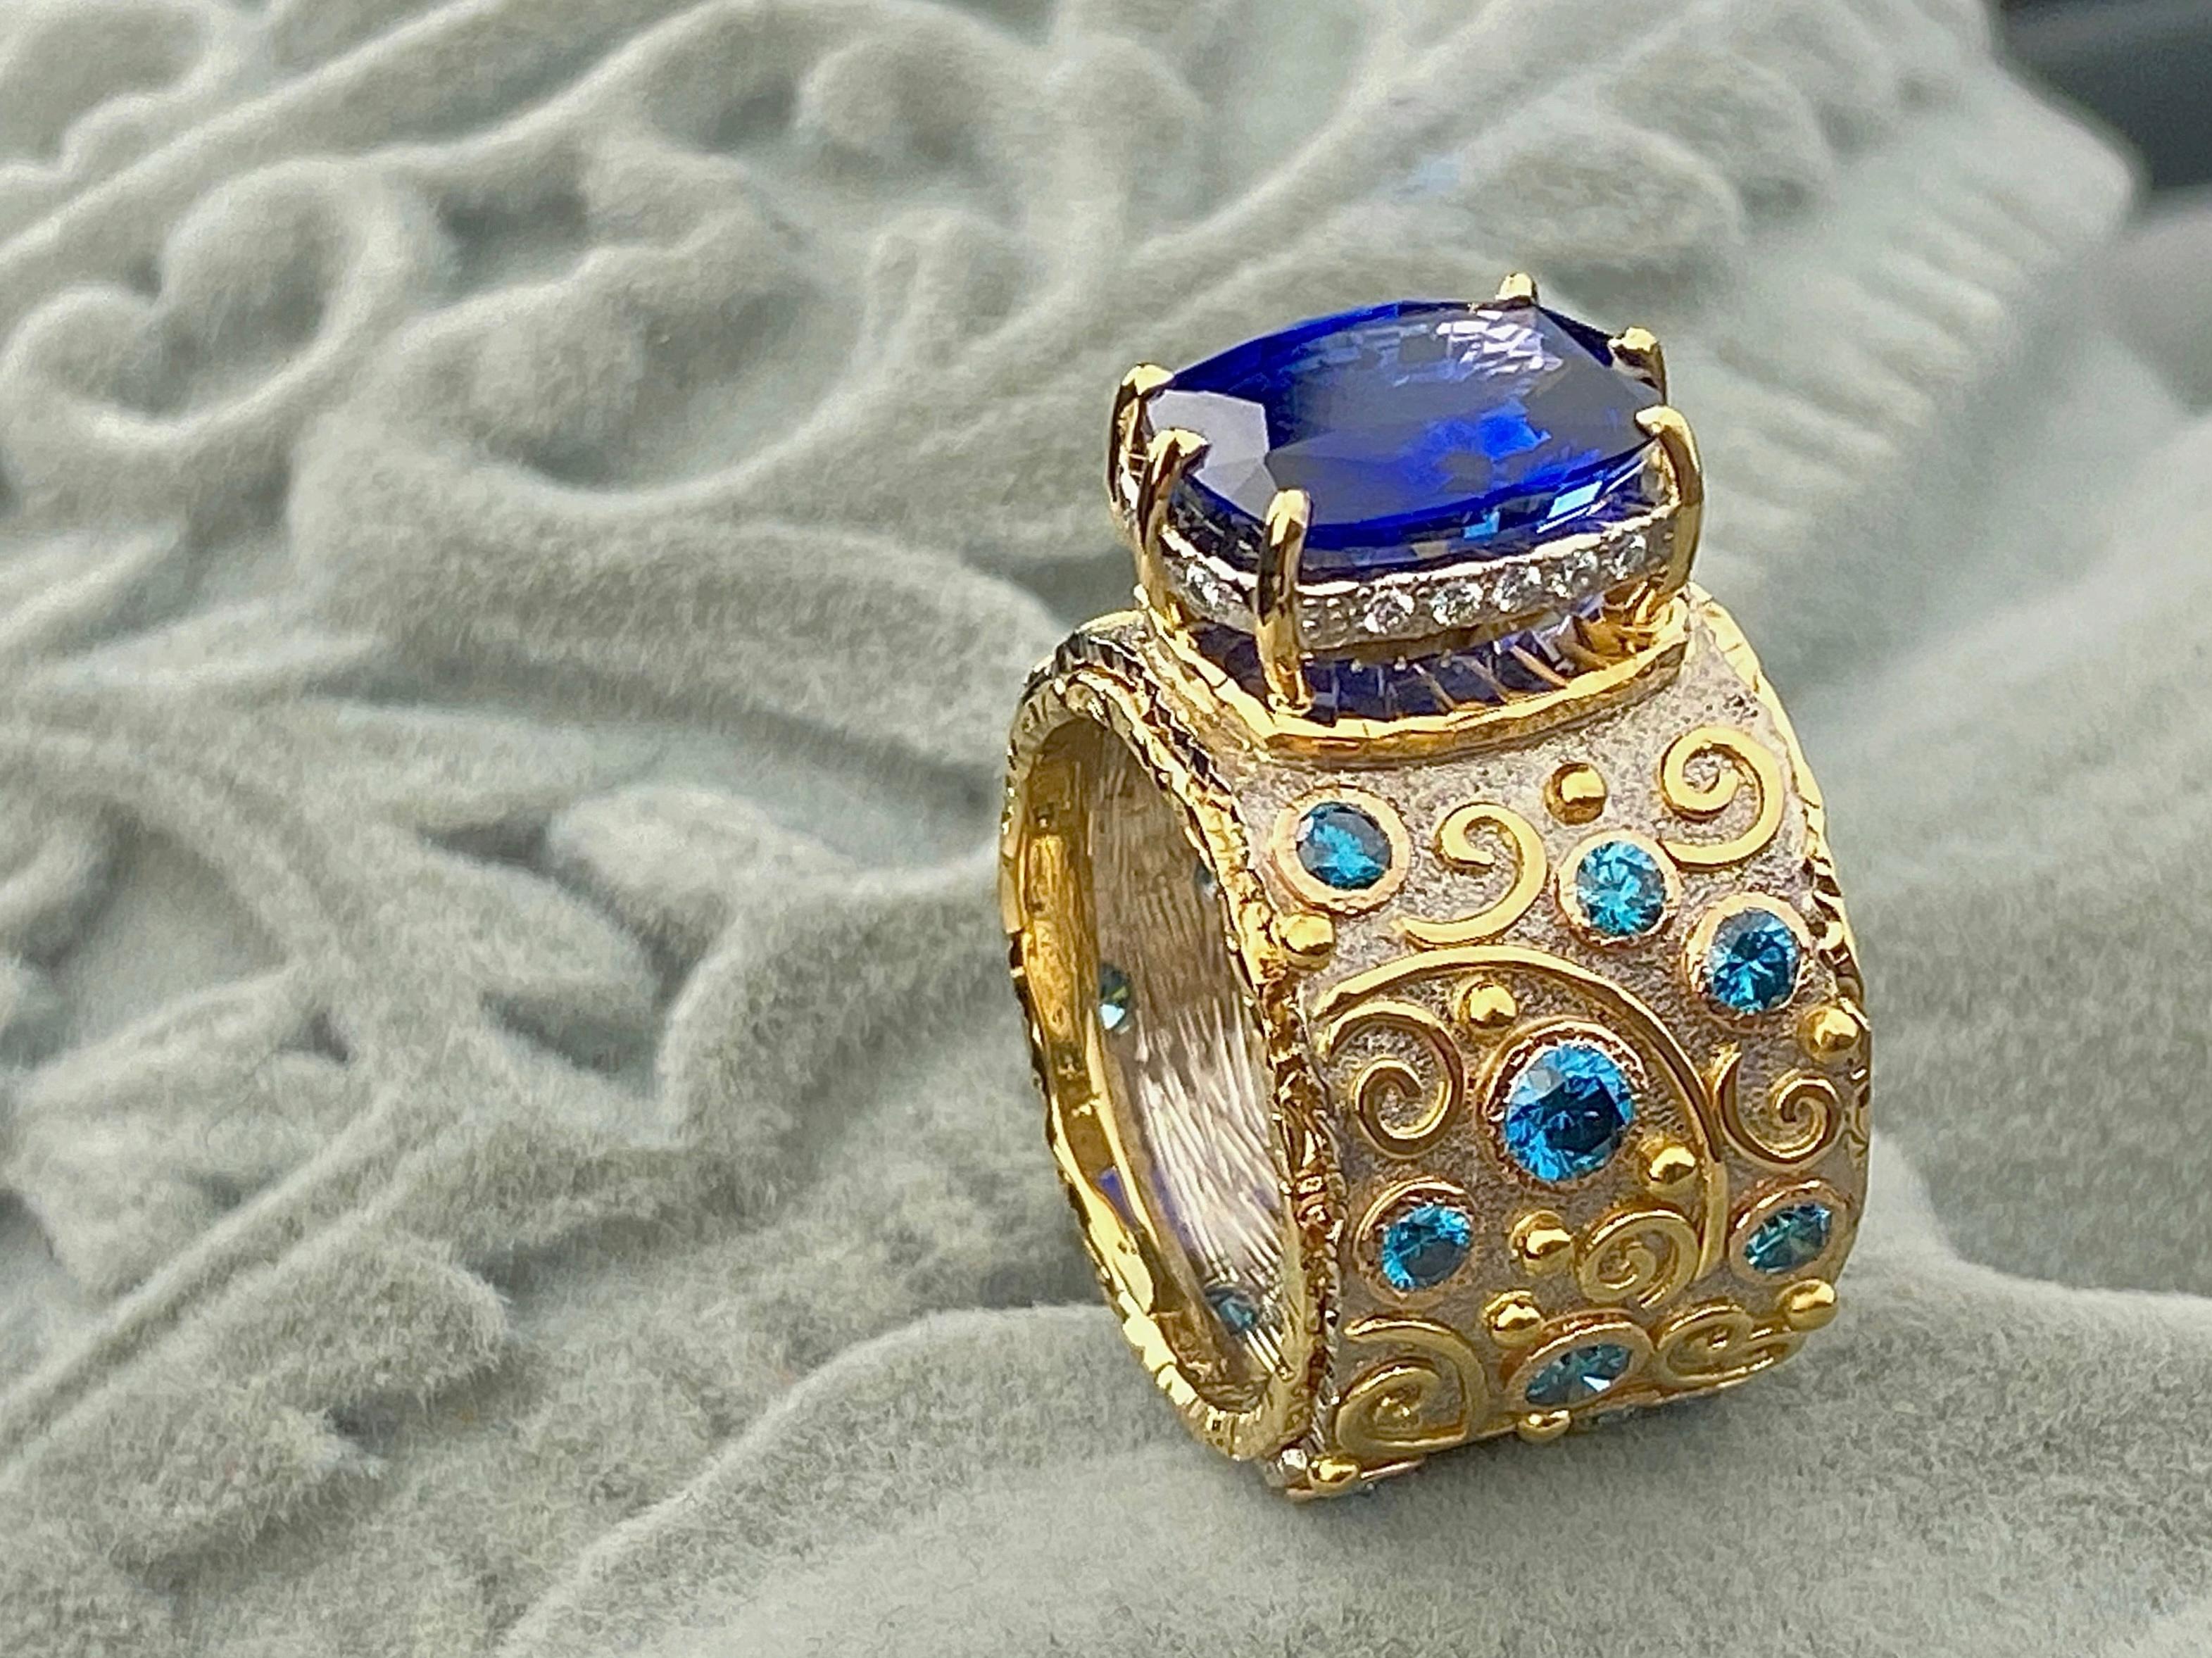 This is magnificent sapphire 6,15 ct worn on the hand engraved band made of white 18kt gold and with yellow laid inlays decorated with 19 blue diamonds and 14 white diamonds VVS/G. Total diamonds 1,18ct. 
Sapphire's gem report available from German